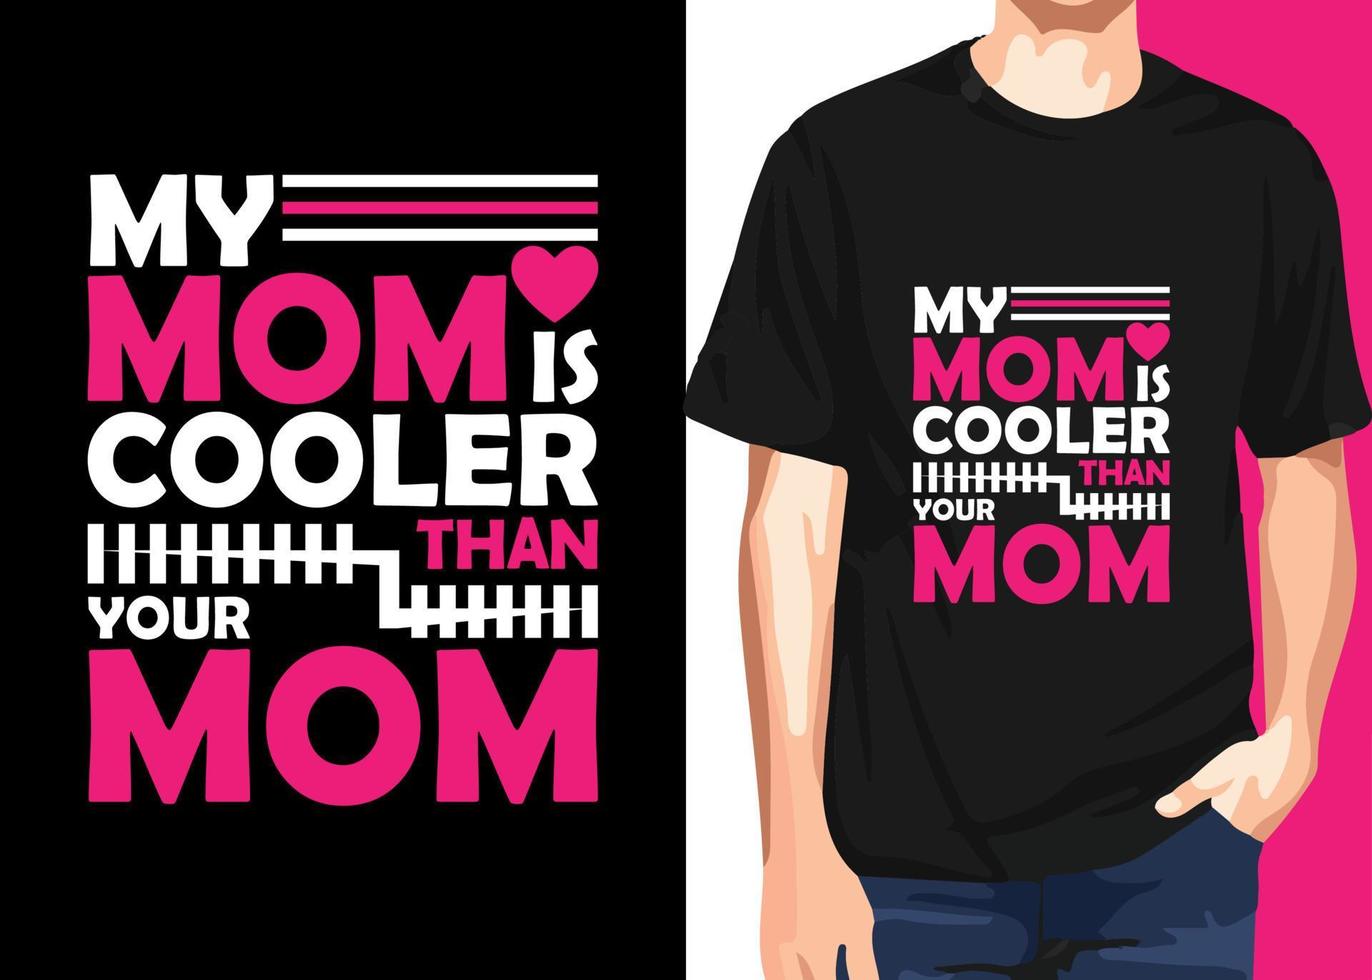 My mom is cooler than your mom  quotes t shirt design vector